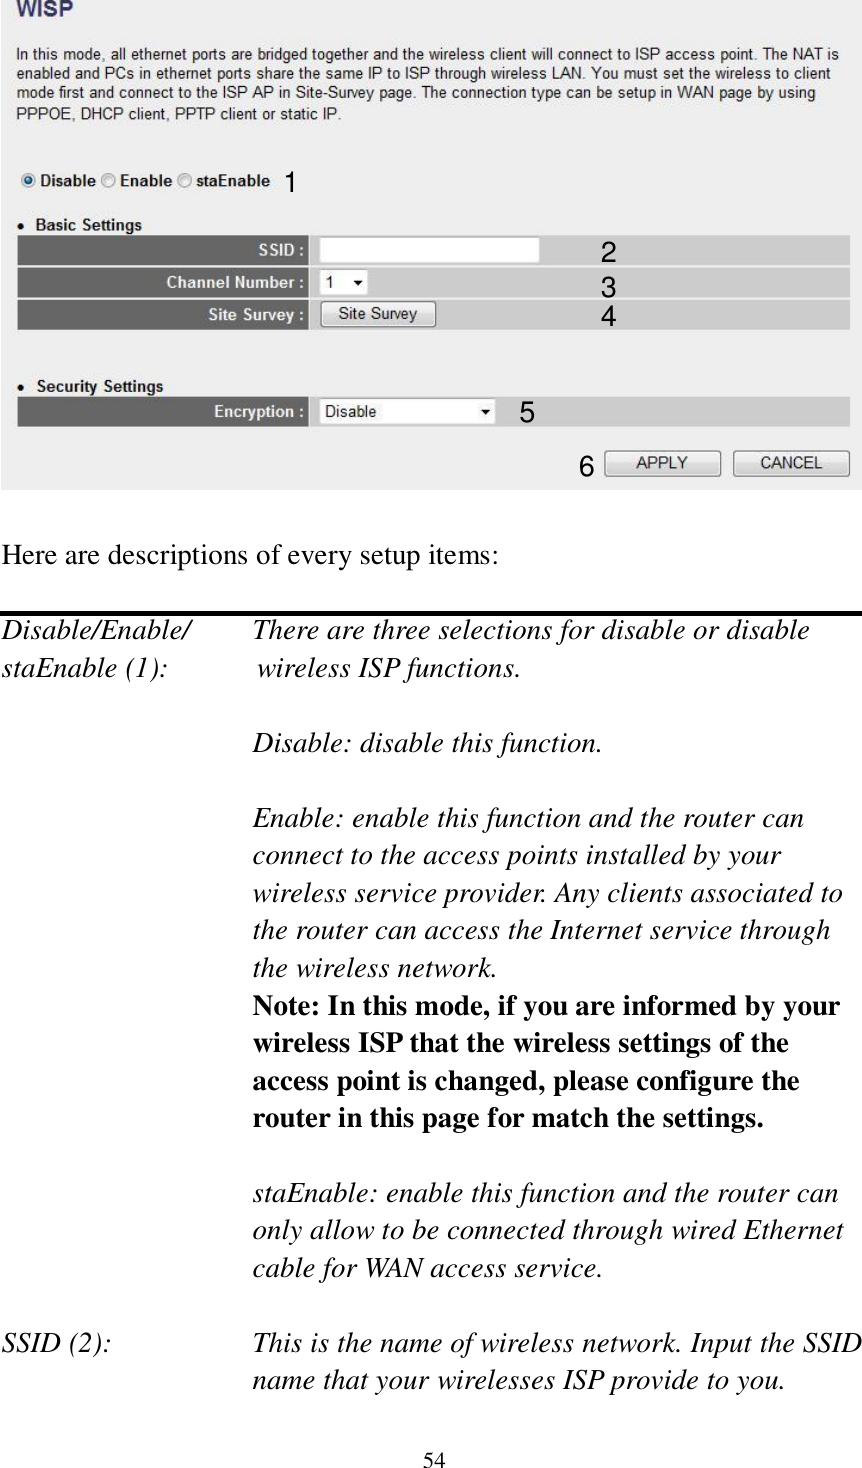 54   Here are descriptions of every setup items:  Disable/Enable/    There are three selections for disable or disable   staEnable (1):            wireless ISP functions.  Disable: disable this function.  Enable: enable this function and the router can connect to the access points installed by your wireless service provider. Any clients associated to the router can access the Internet service through the wireless network. Note: In this mode, if you are informed by your wireless ISP that the wireless settings of the access point is changed, please configure the router in this page for match the settings.  staEnable: enable this function and the router can only allow to be connected through wired Ethernet cable for WAN access service.  SSID (2):    This is the name of wireless network. Input the SSID name that your wirelesses ISP provide to you. 1 2 3 4 5 6 